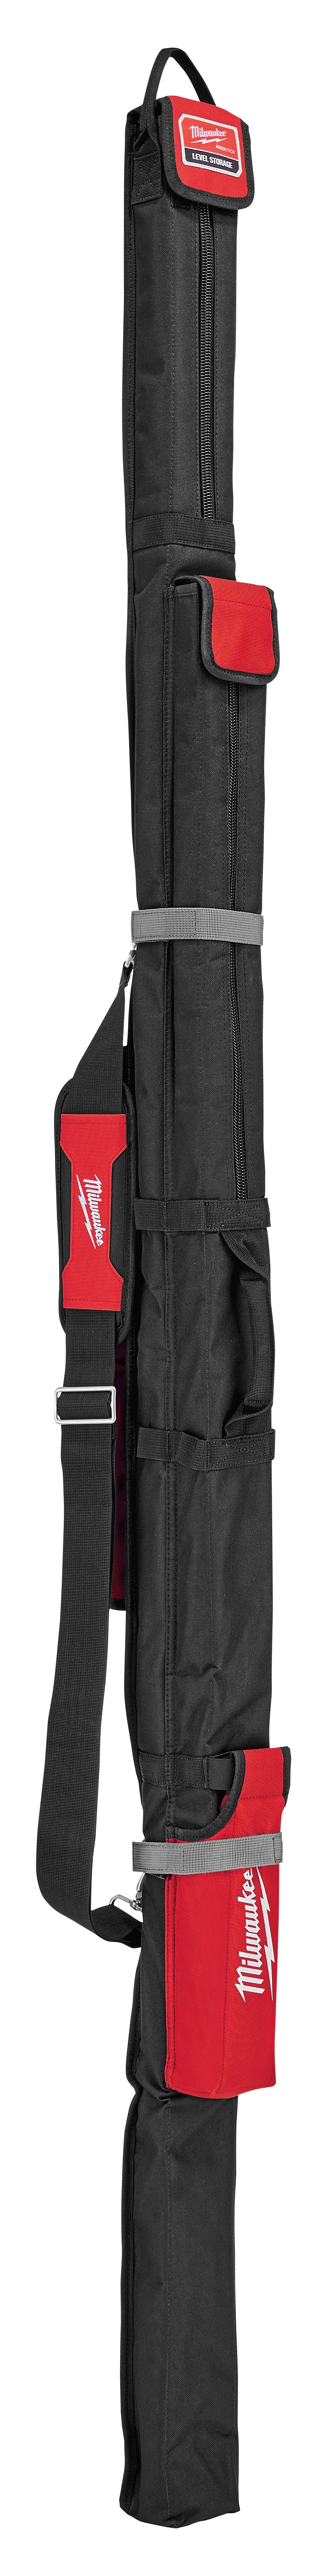 Milwaukee® MLSB78 Level Bag, For Use With 78 in Level, Zipper Closure, 4-Pockets, Nylon, Black/Red